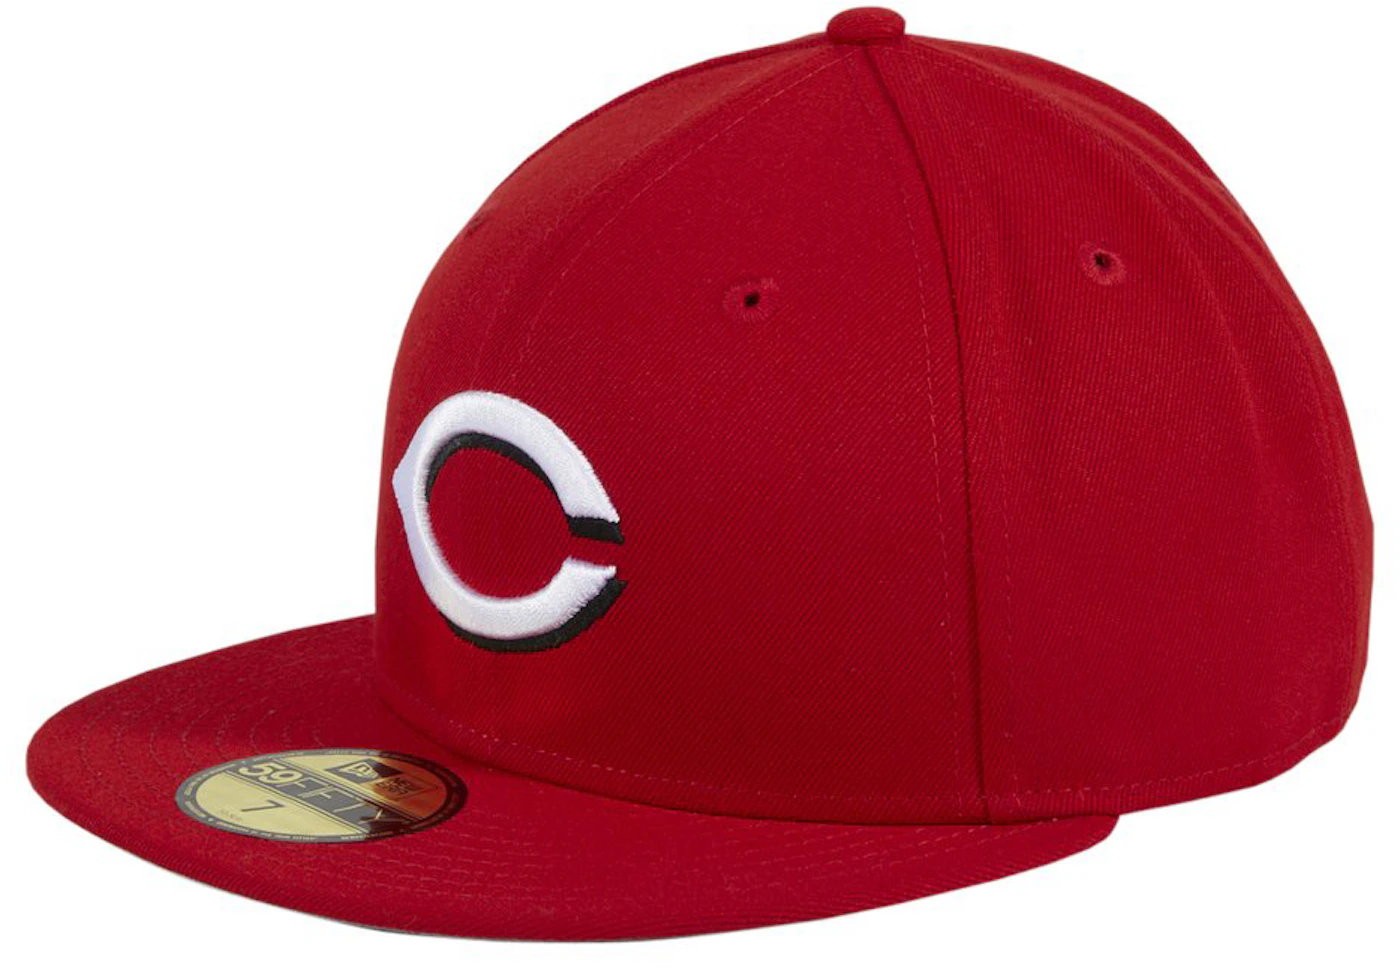 For their 150th year, Reds going retro